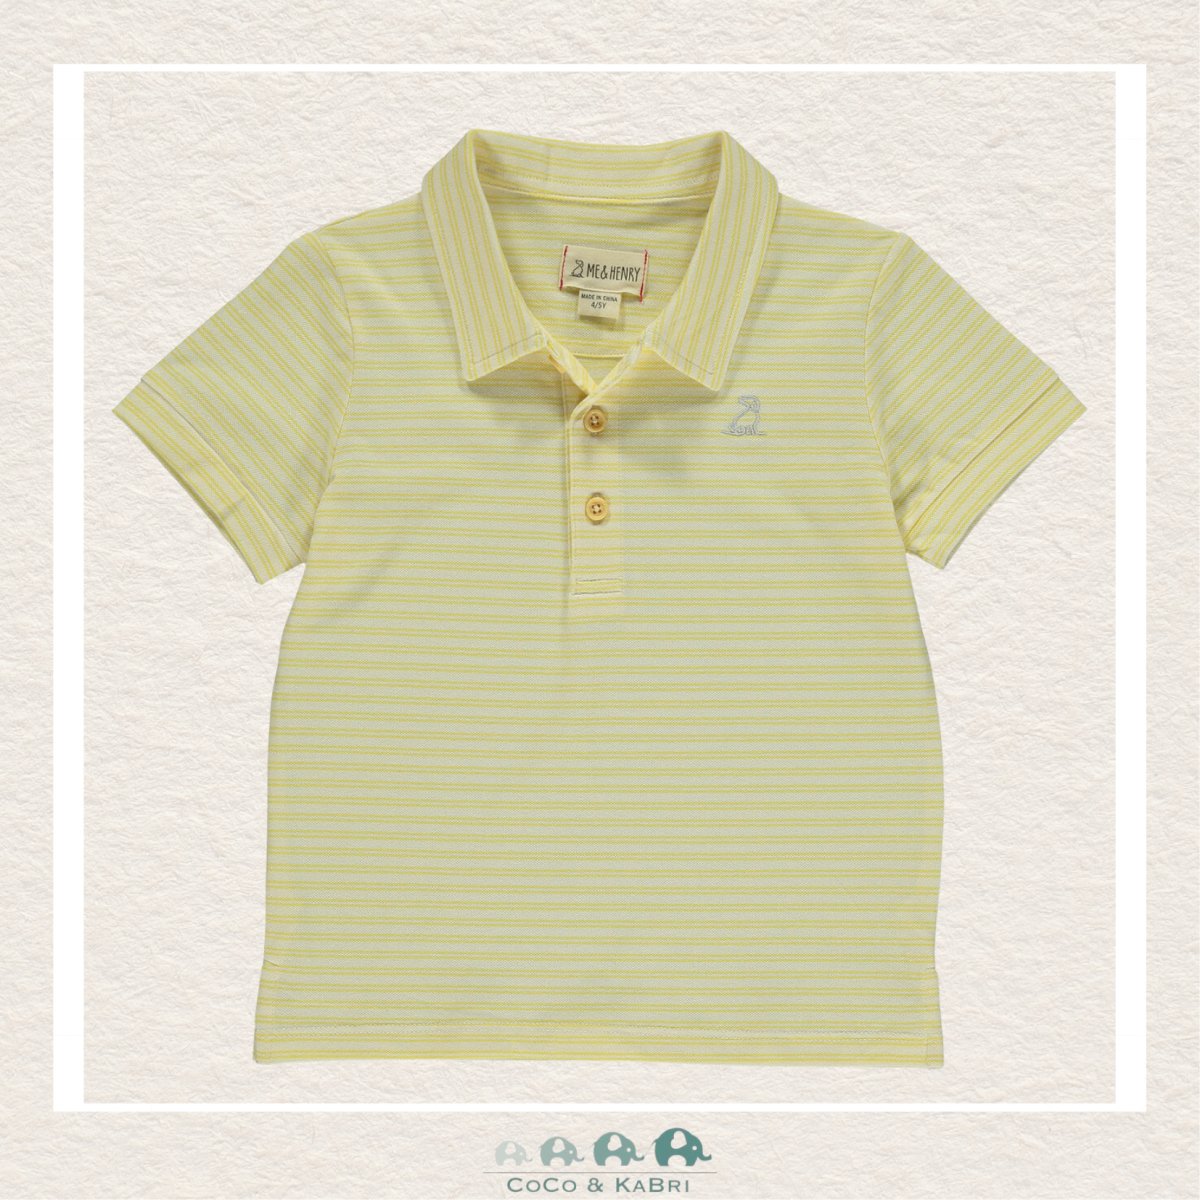 Me & Henry: Boys Starboard Yellow Polo Shirt